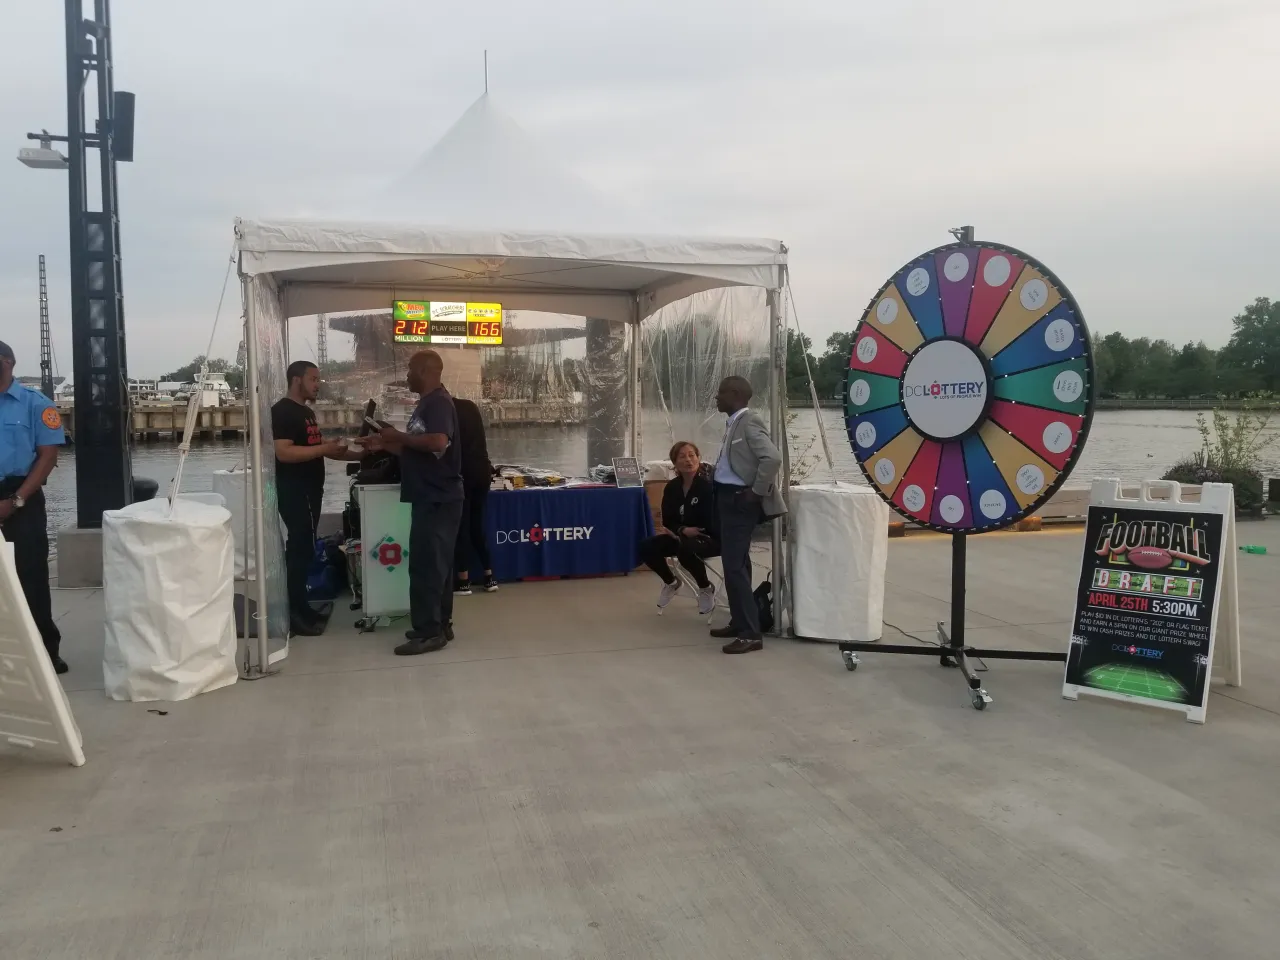 dc lottery tent and prize wheel